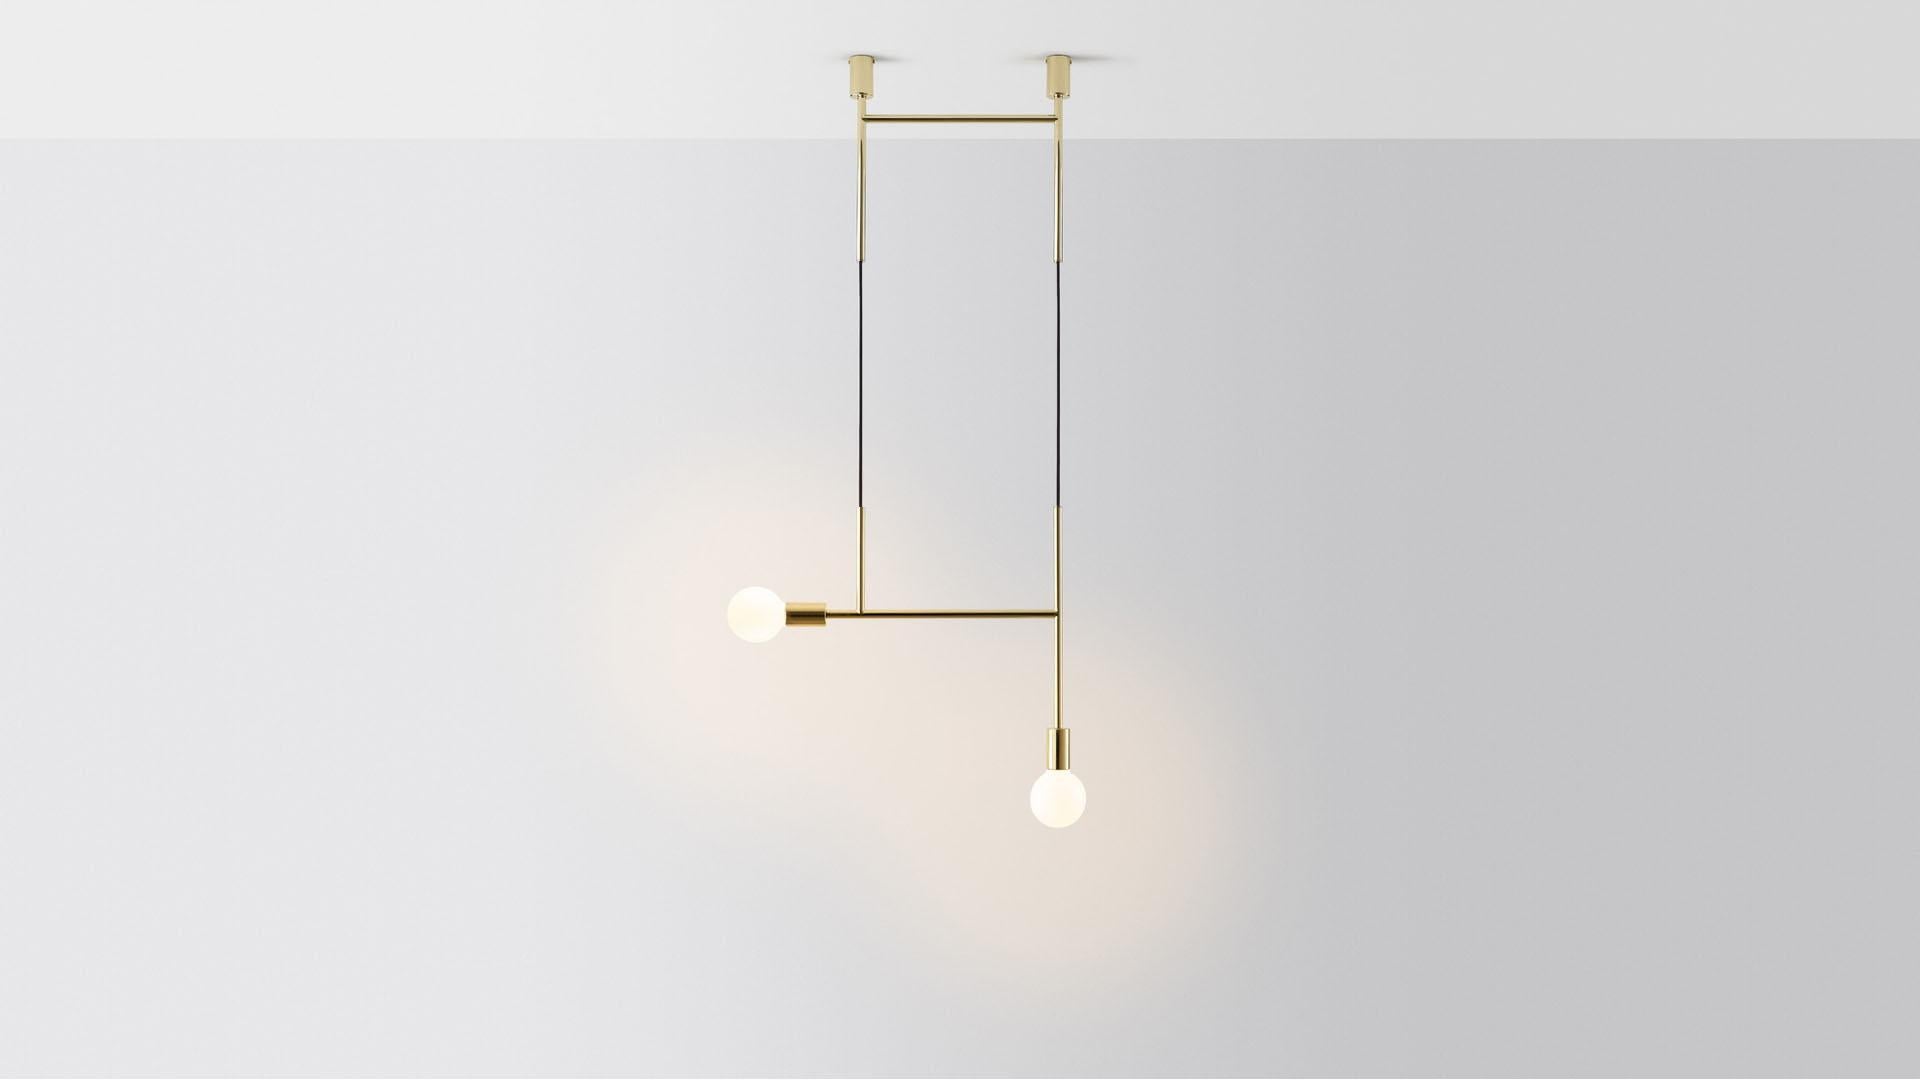 Side kick pendant light by Volker Haug.
Dimensions: D 2 x W 63.2 x H 108 cm. 
Material: Brass. 
Finish: Polished, Aged, Brushed, Bronzed, Blackened, or Plated
Cord: Fabric or metal
Light: Opal G95 LED (E26/E27 110 - 240V, 12V version